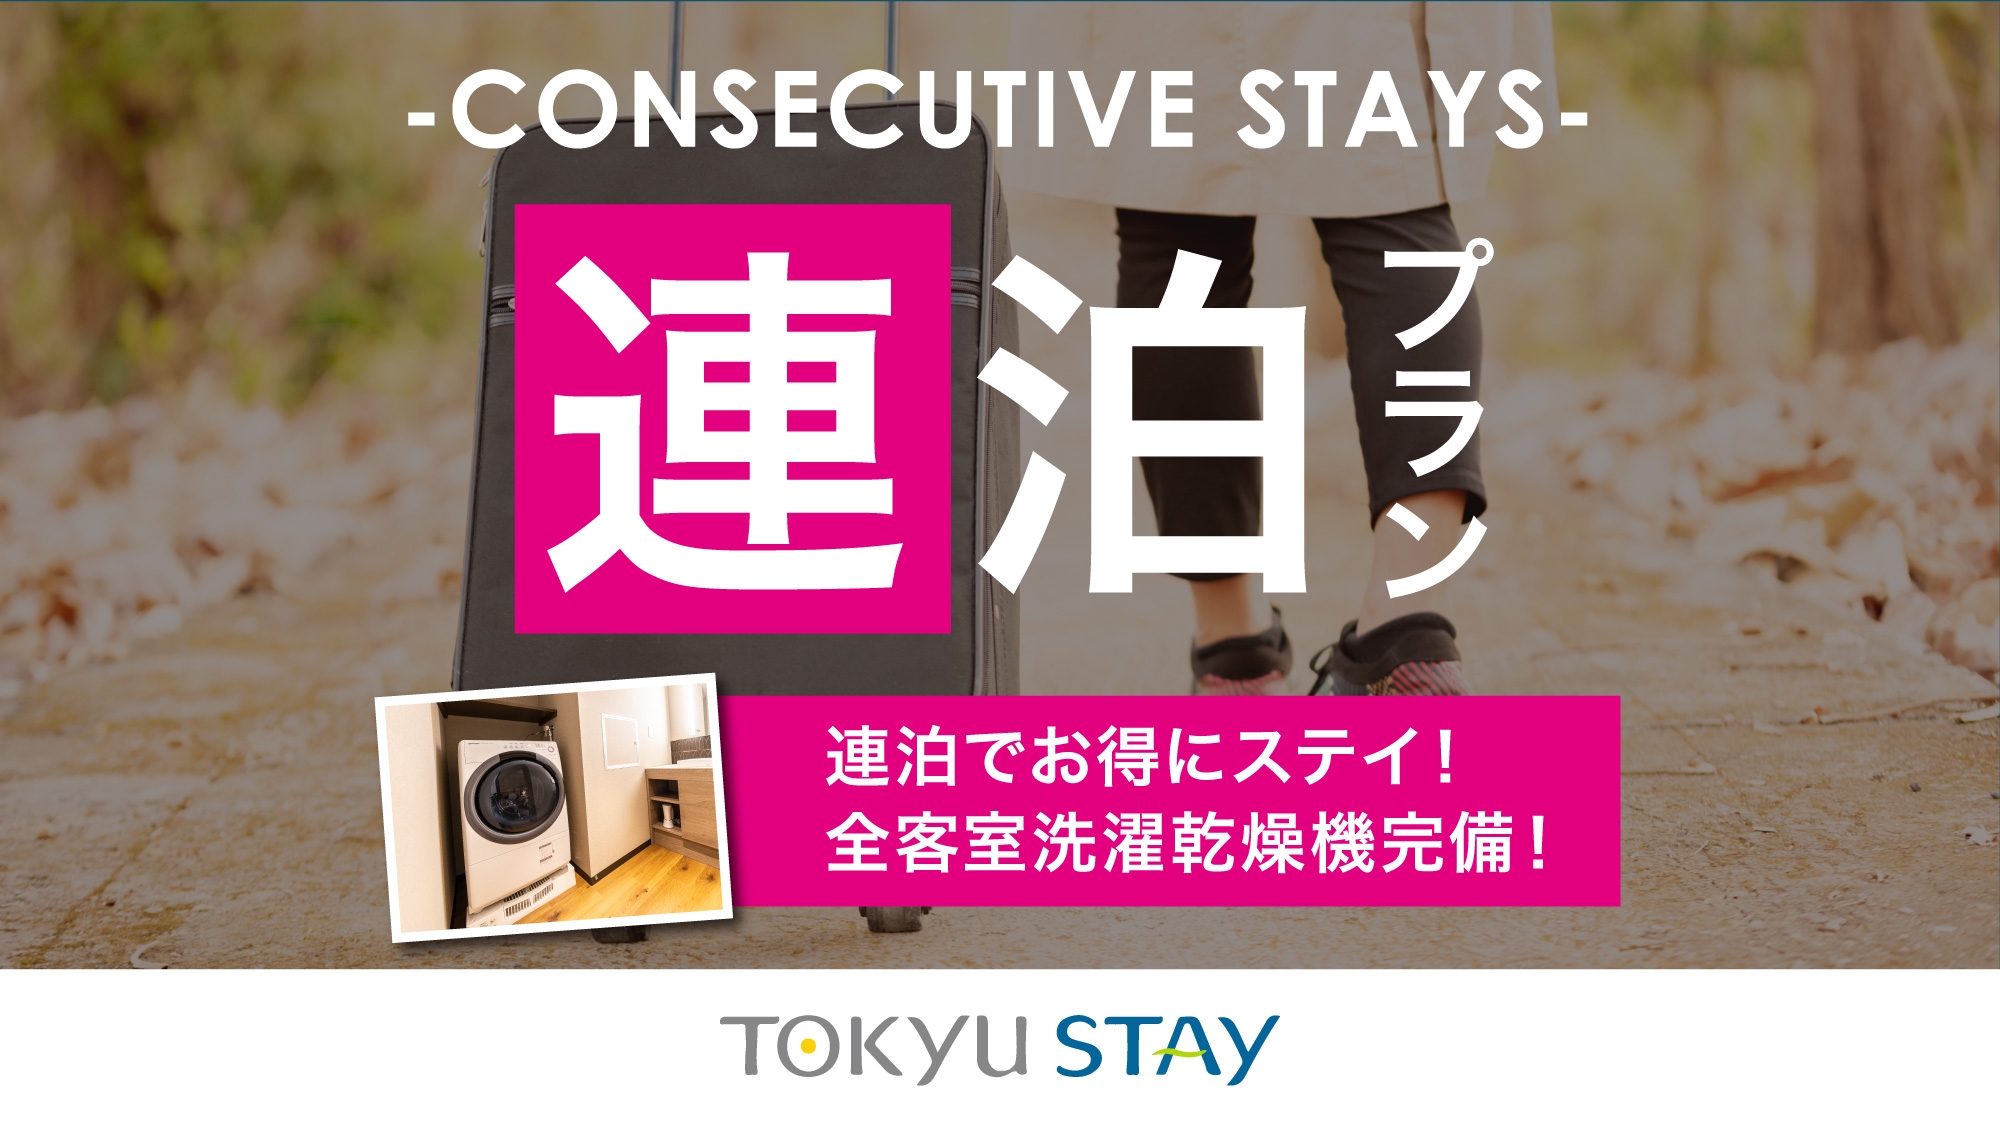 ■ [Consecutive stay plan] Click here for reservations for consecutive stays! You can have a comfortable stay with a full range of facilities such as a washer and dryer.